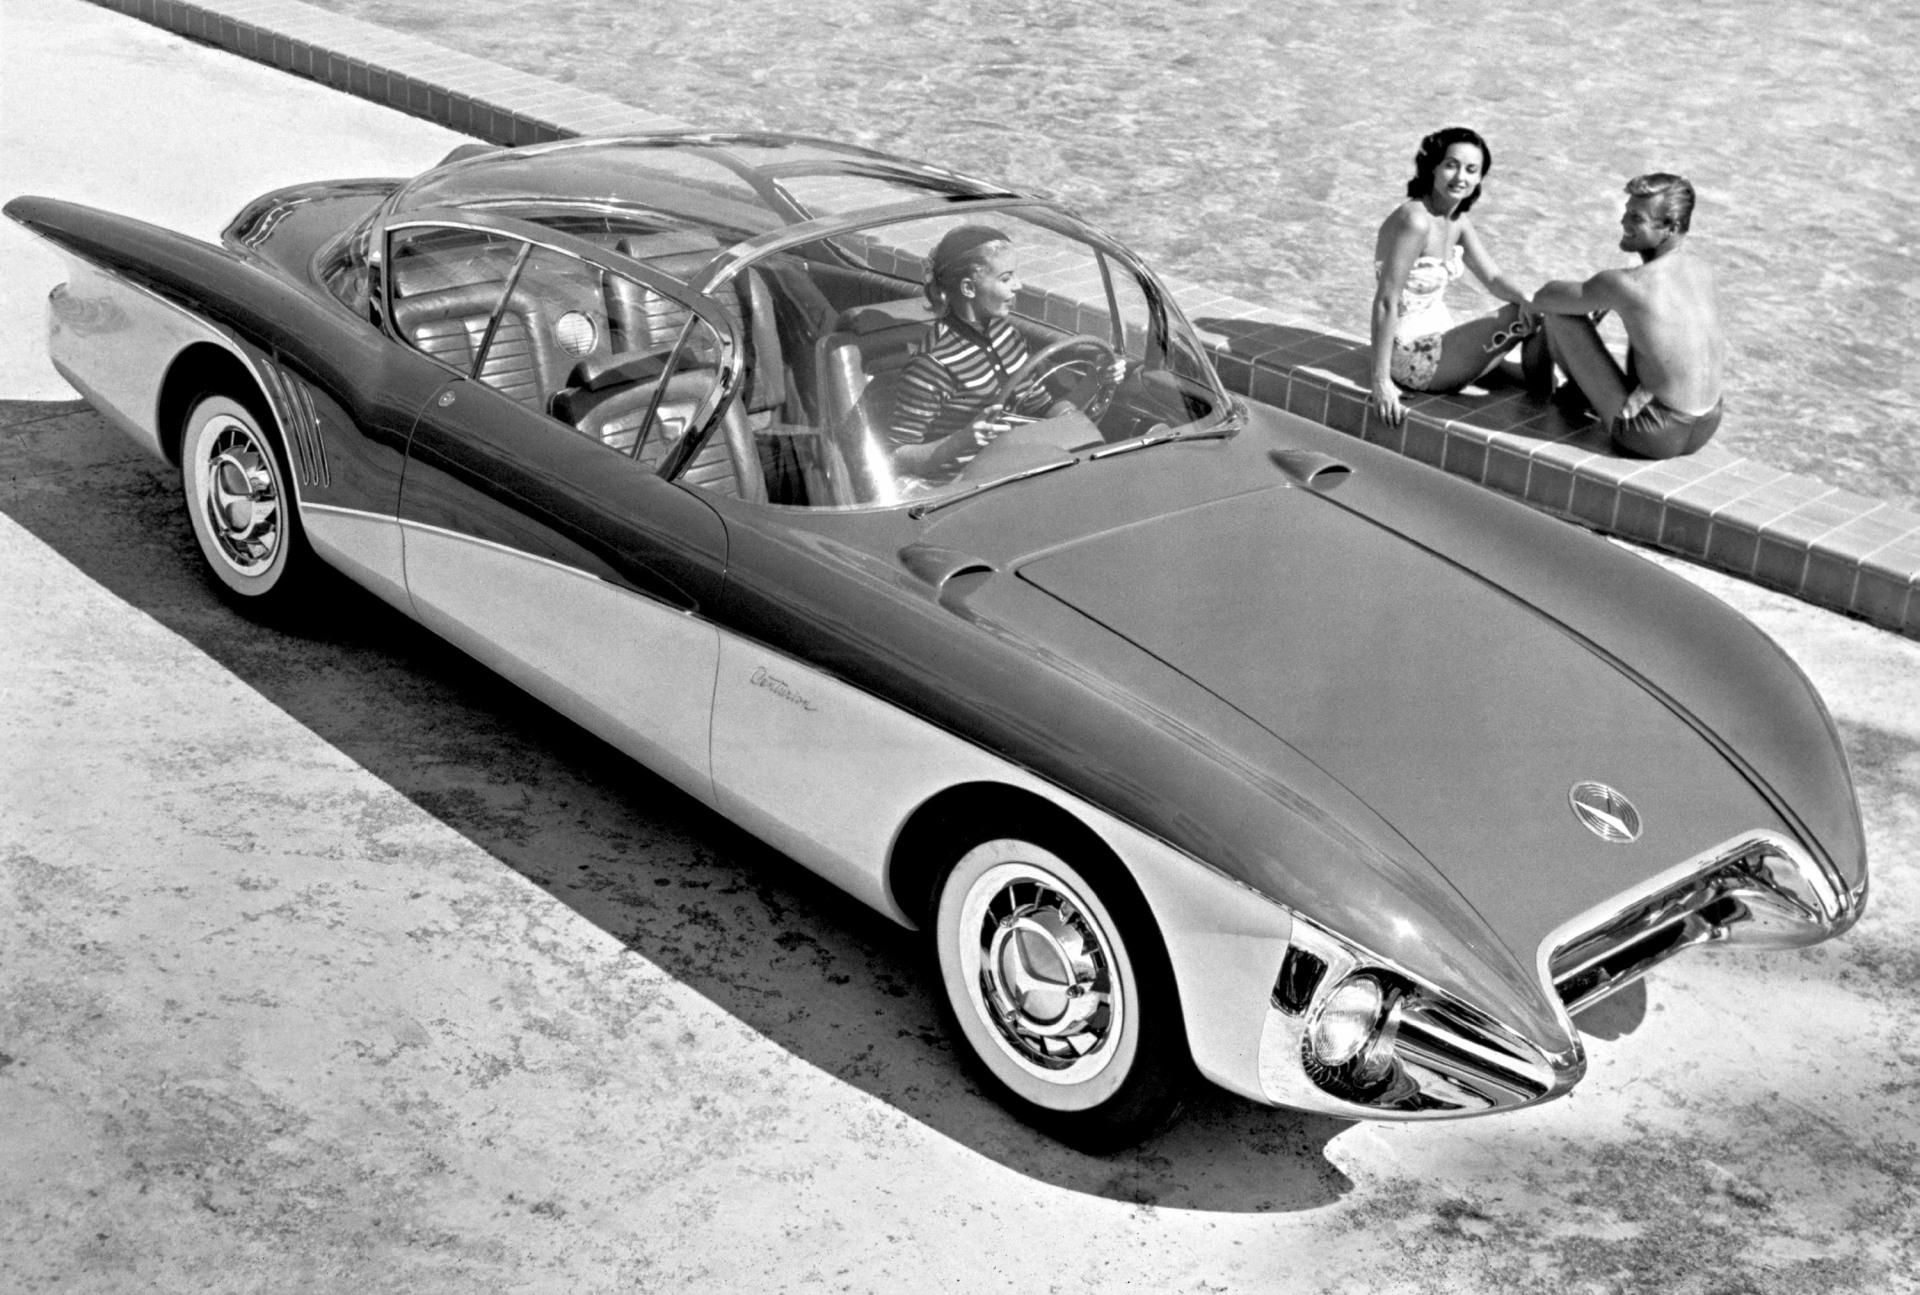 1956 Buick Centurion Concept Car in black and white on beach